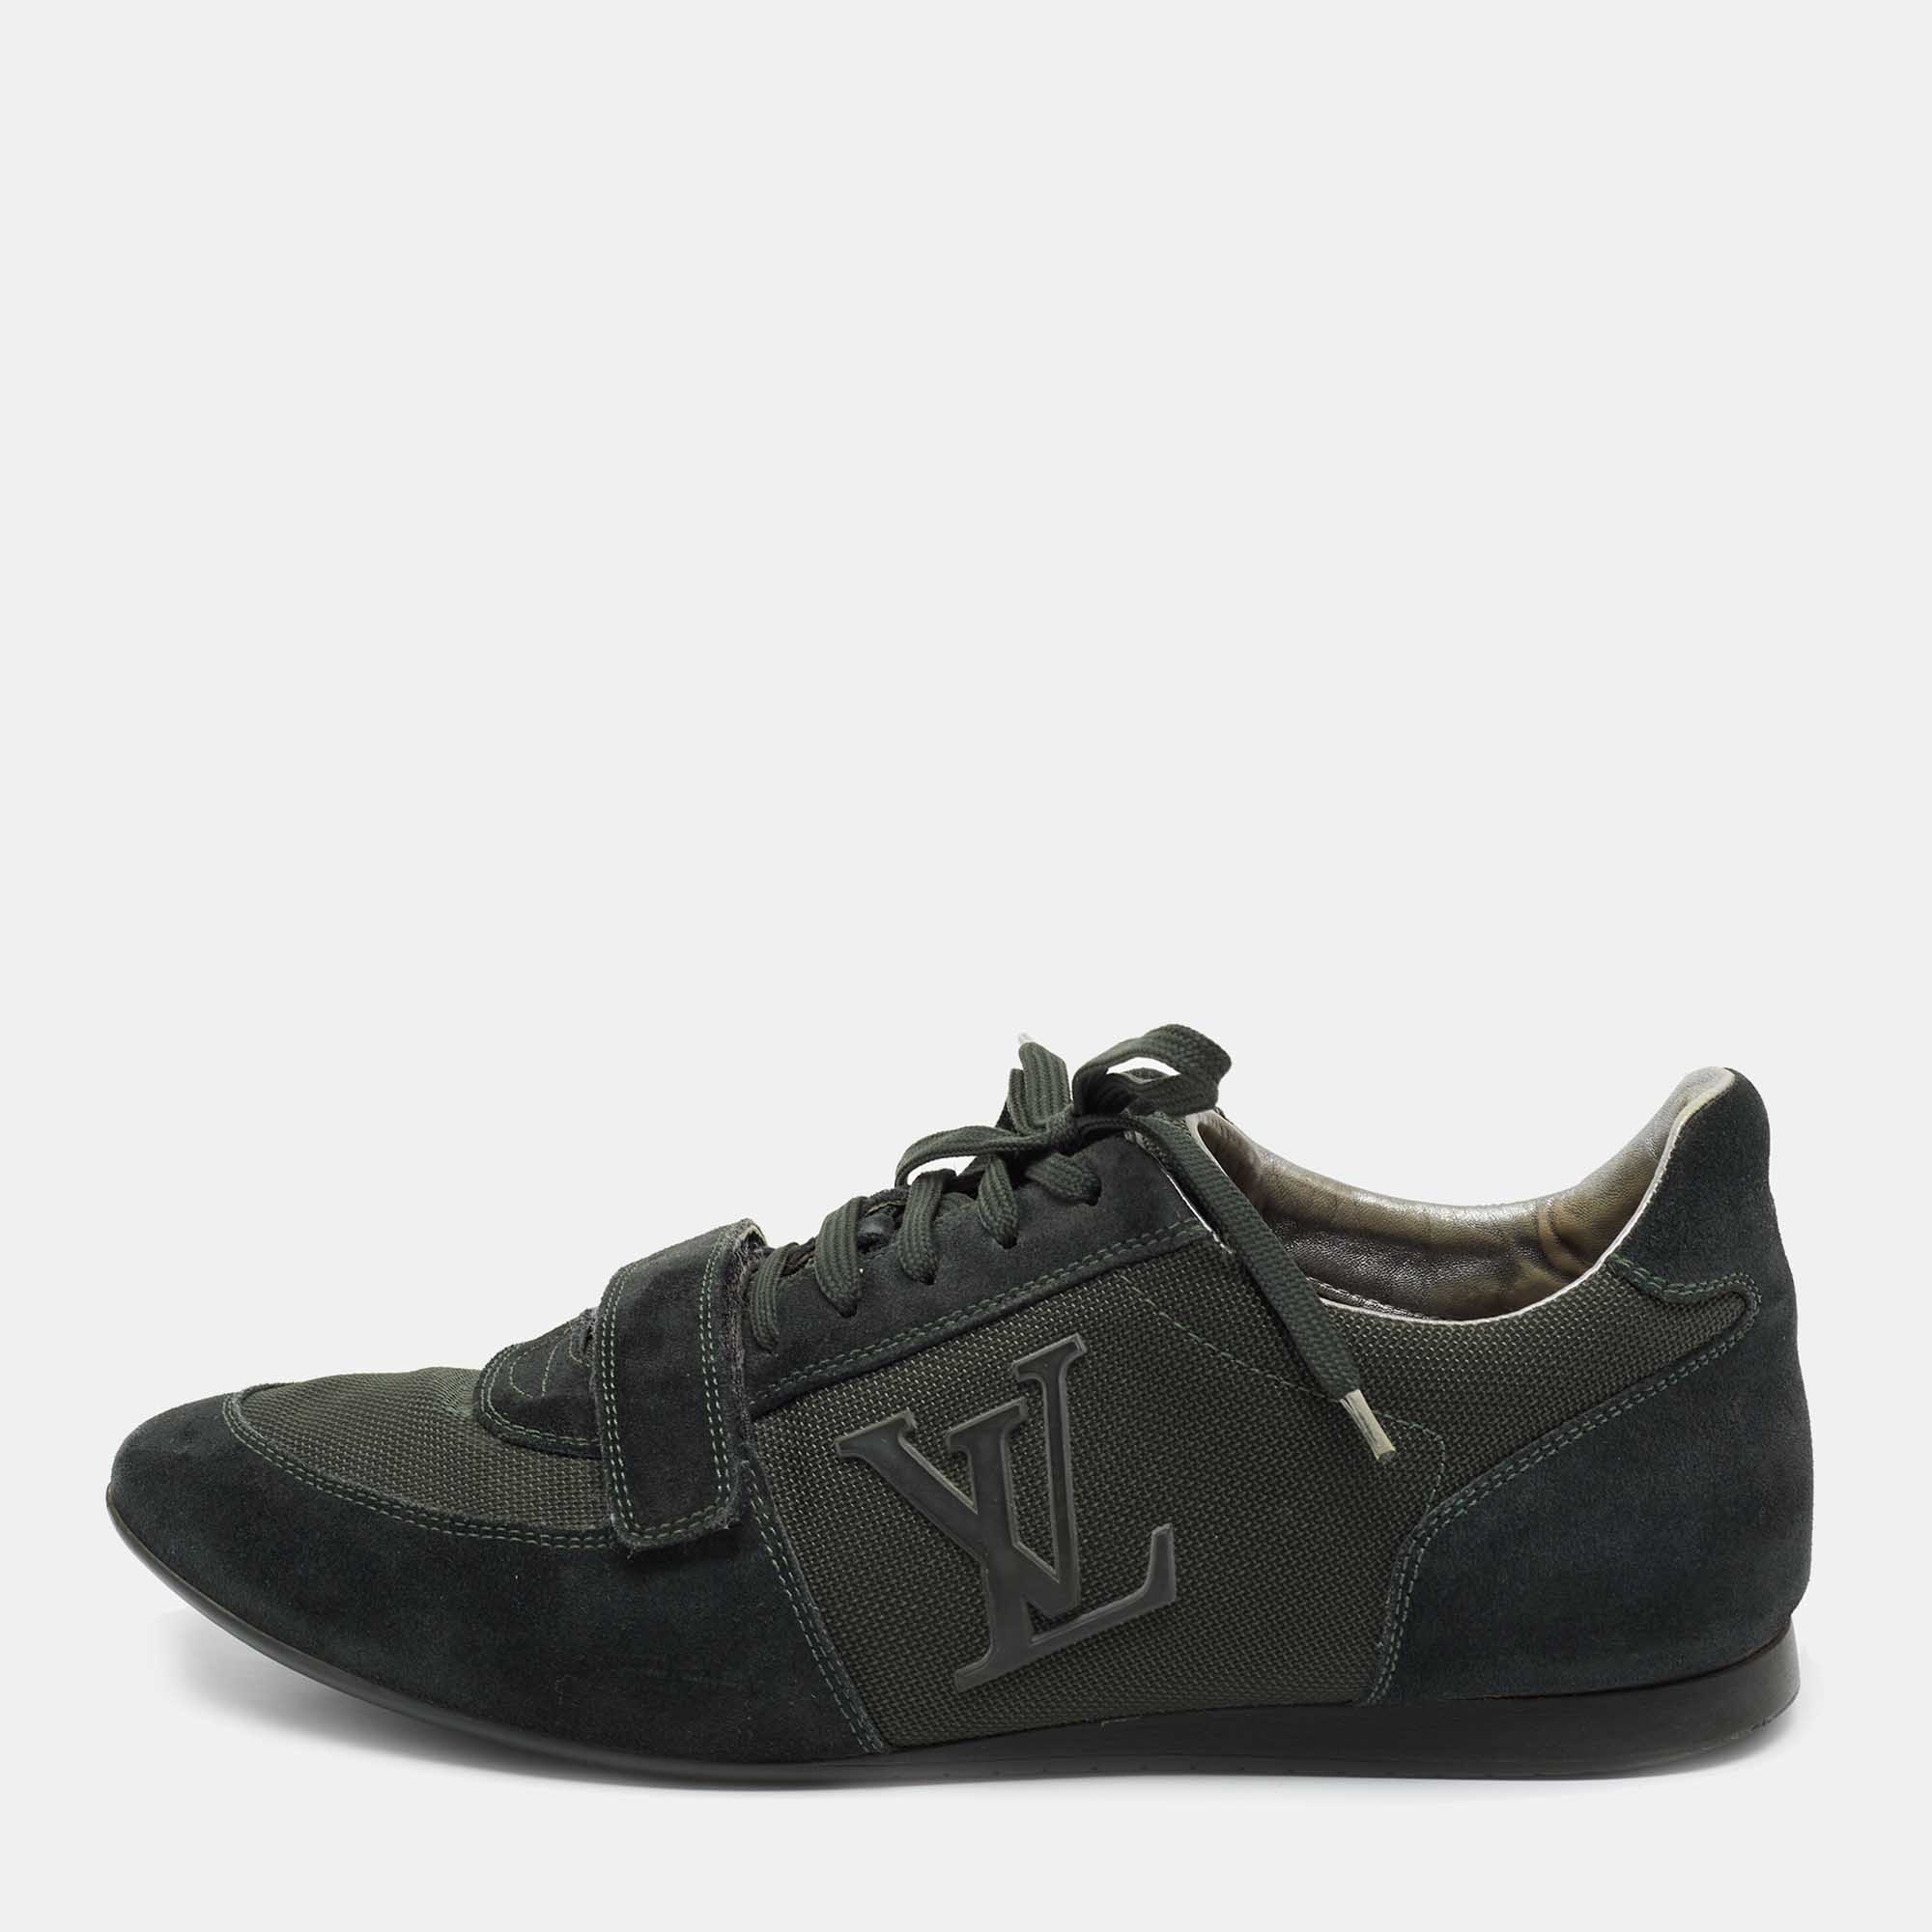 Louis Vuitton Black Suede And Mesh Runner Sneakers Size 41